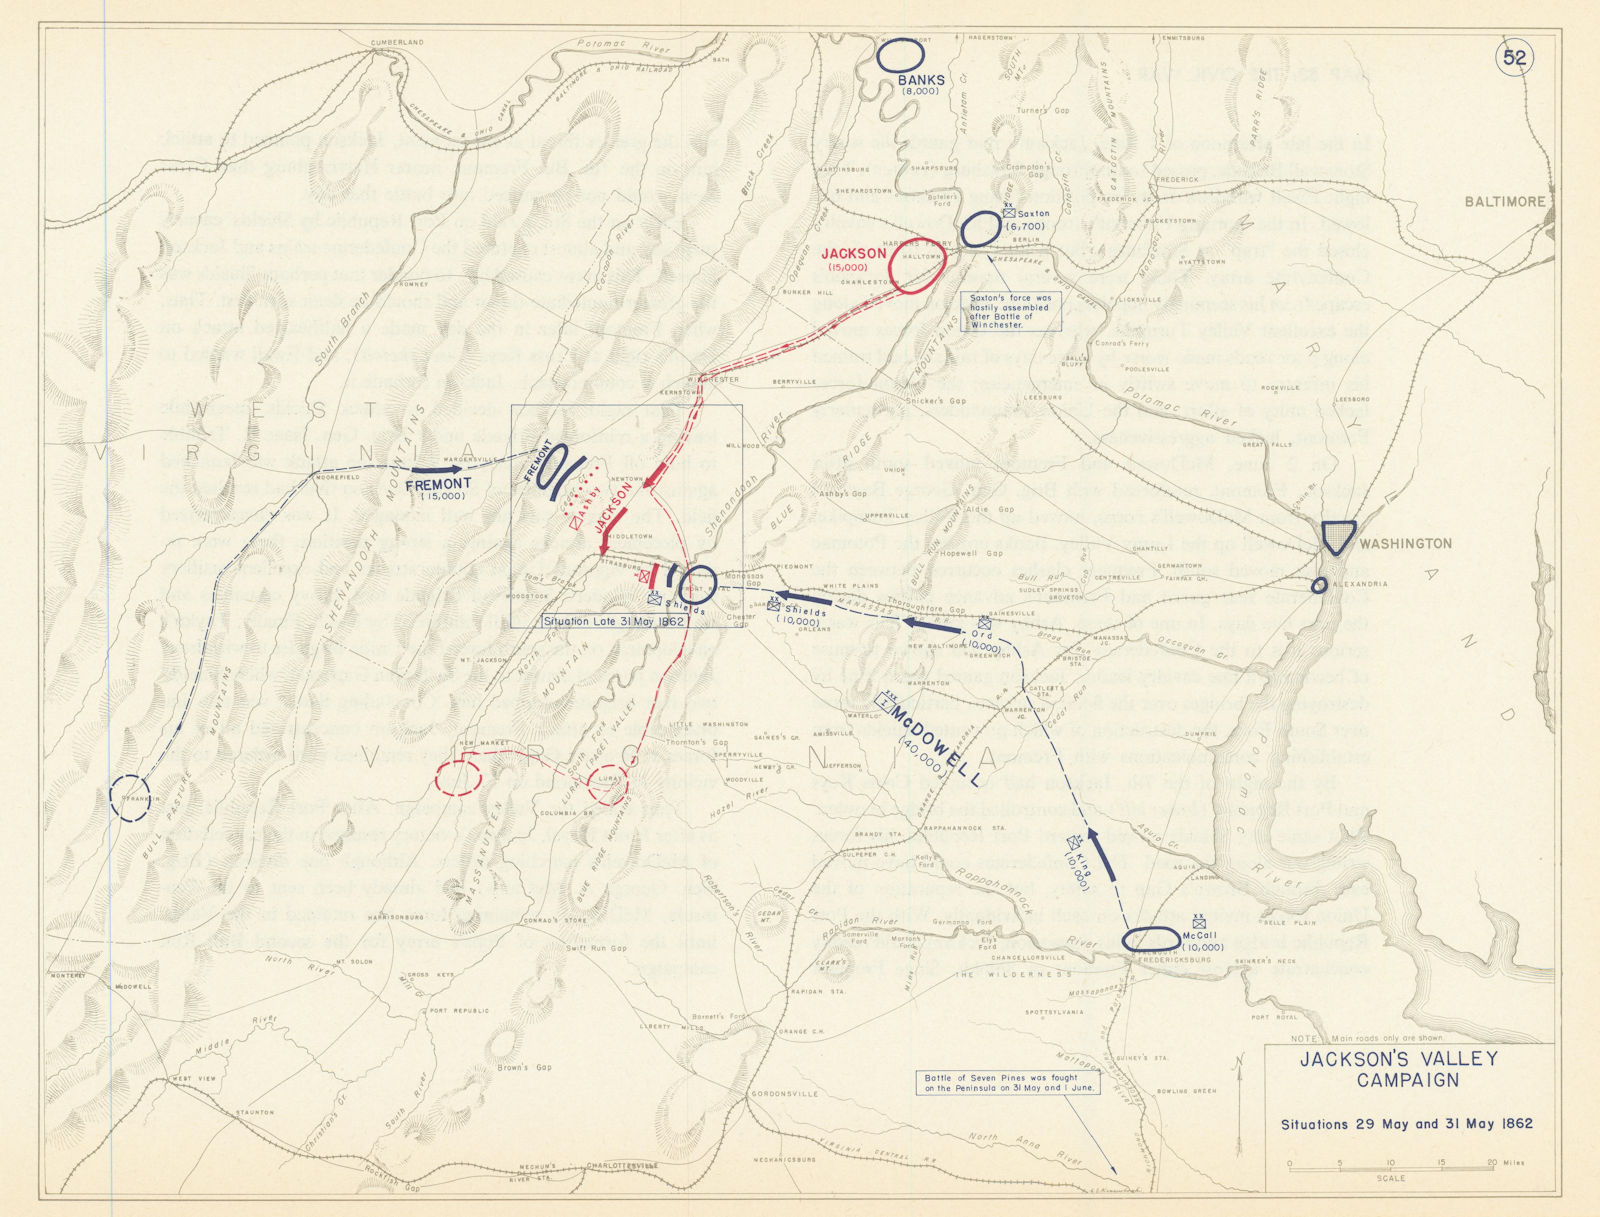 American Civil War. Situation 29-31 May 1862. Jackson's Valley Campaign 1959 map